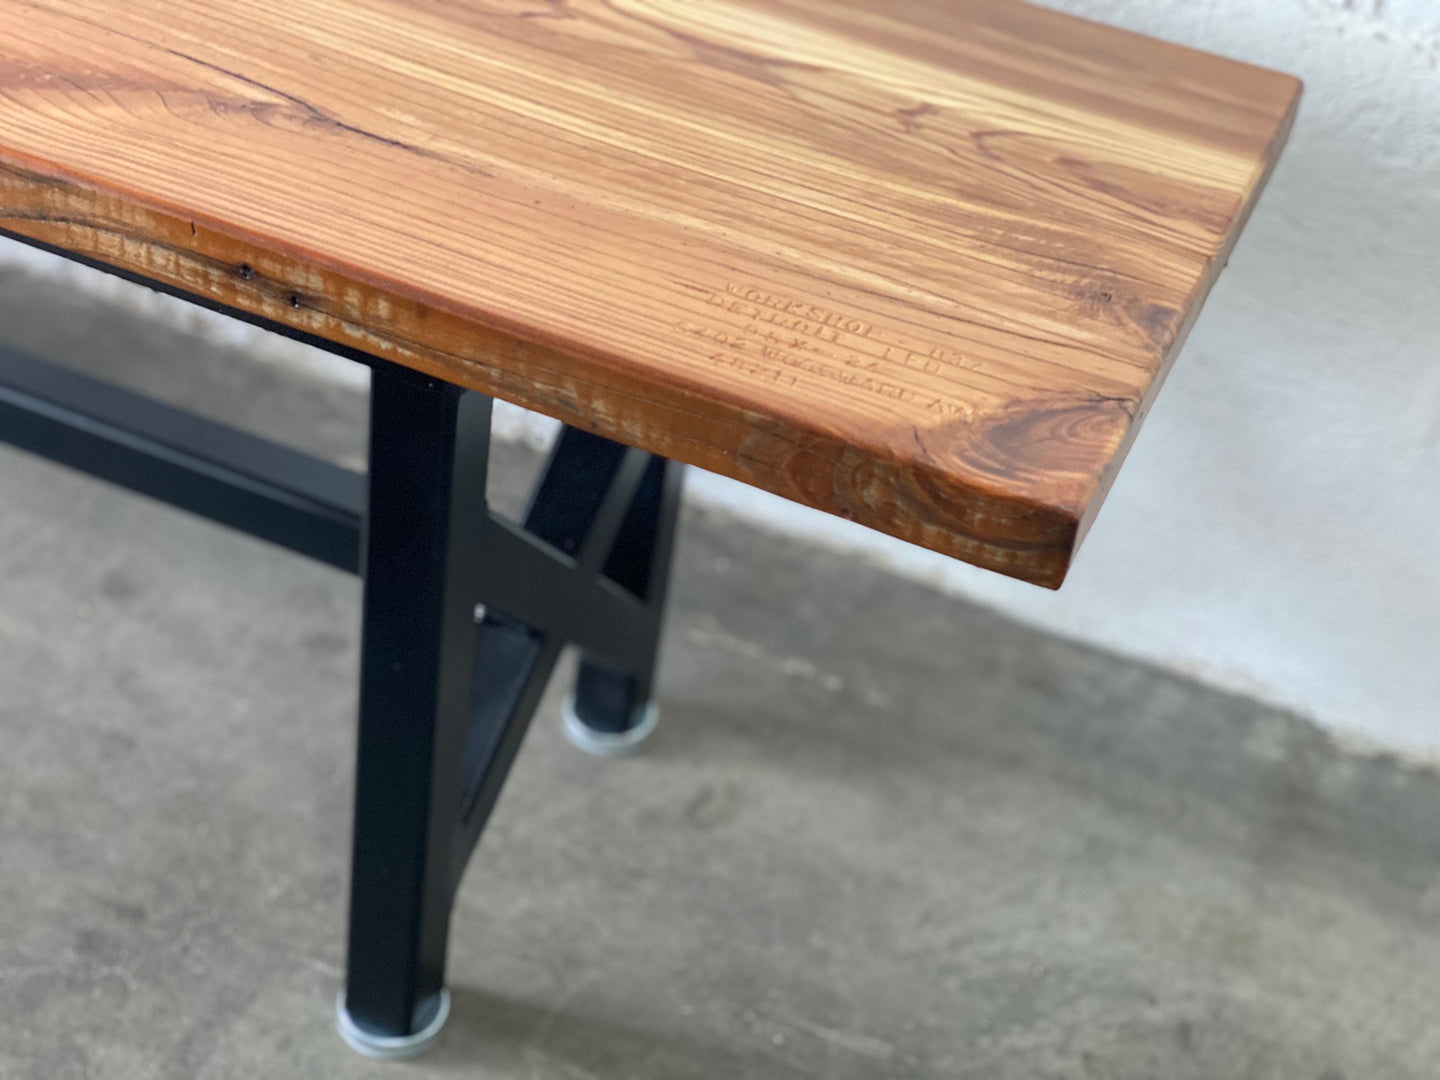 Lafayette Extendable Table and Bench - Natural Finish